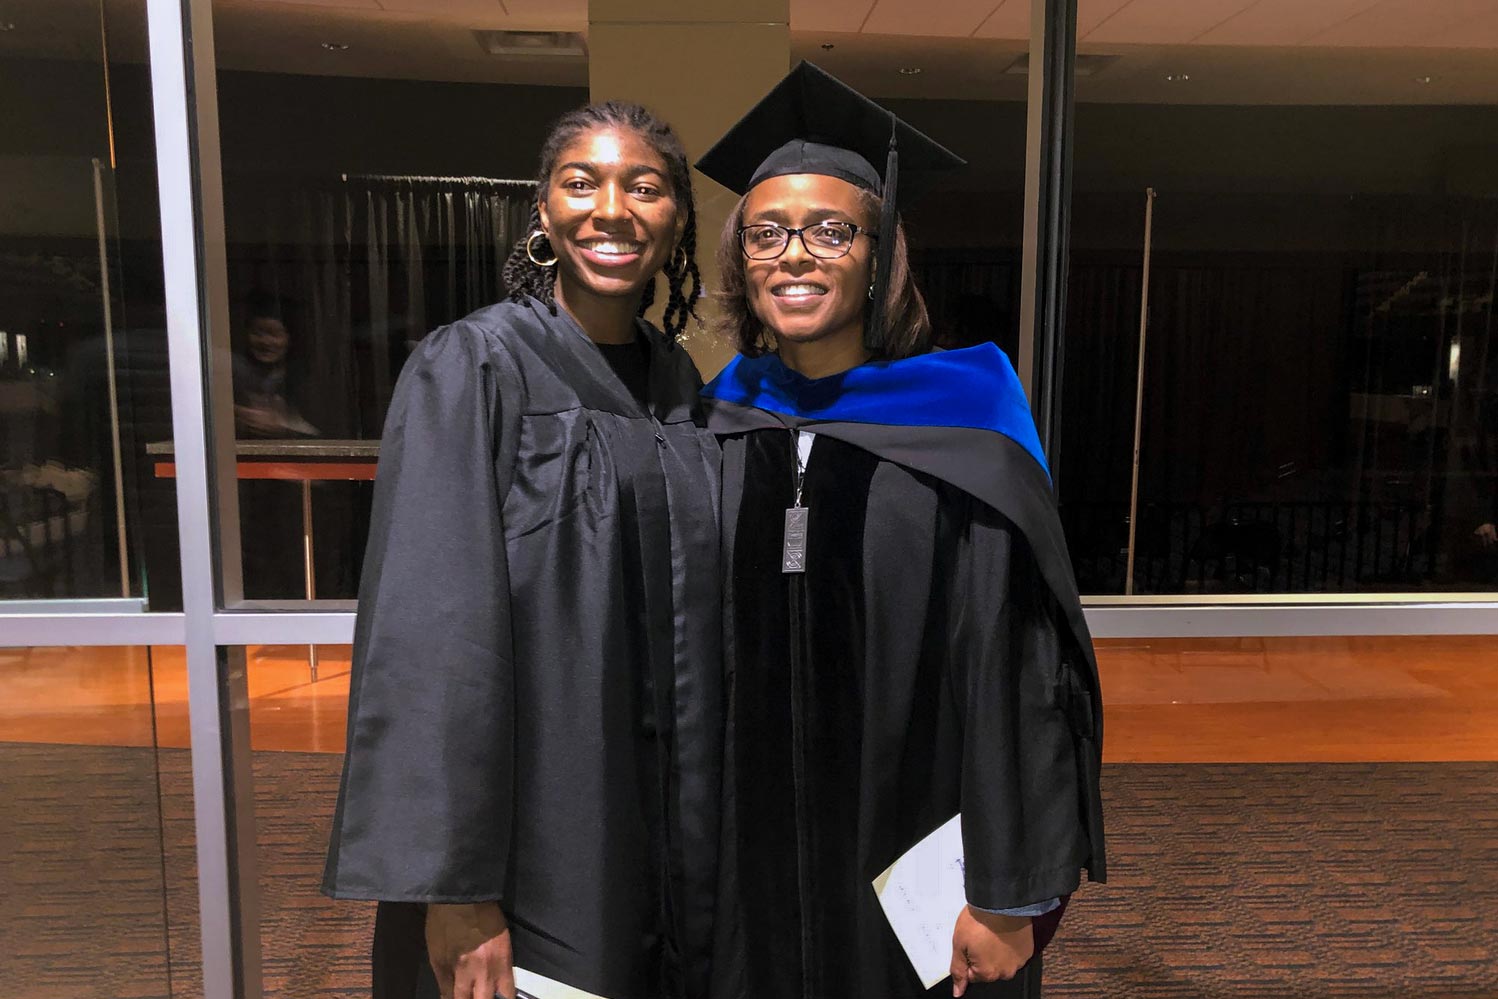 Willoughby, left, and Carla Williams stand together at graduation